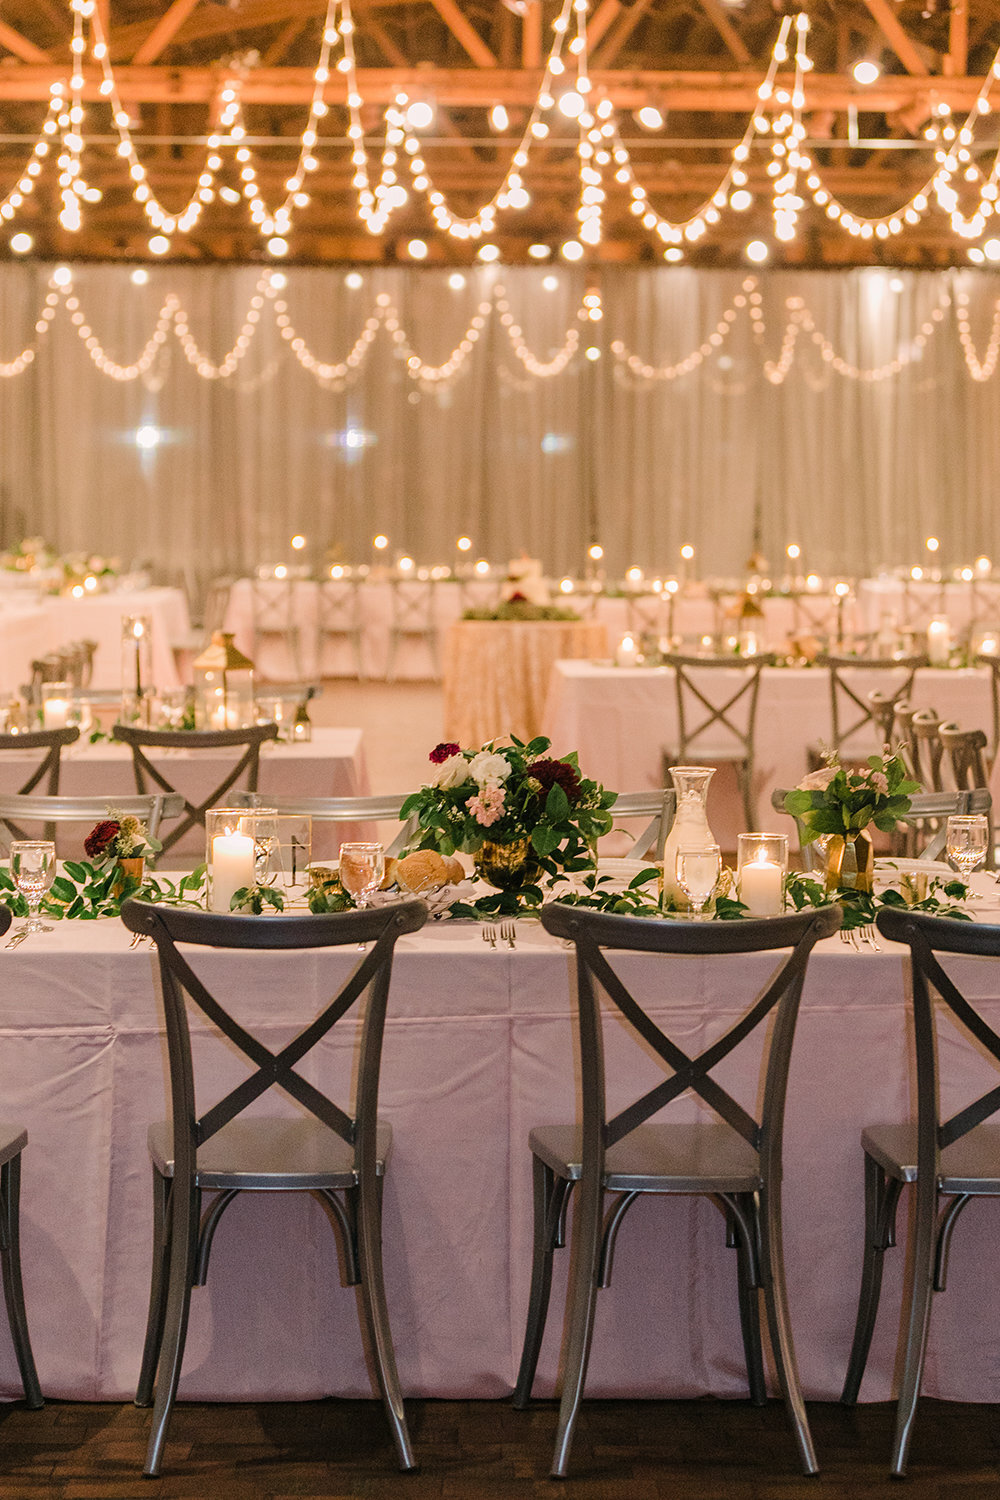 Twinkling lights, candles and lush florals decorate this romantic wedding reception at Rockwell on the River.